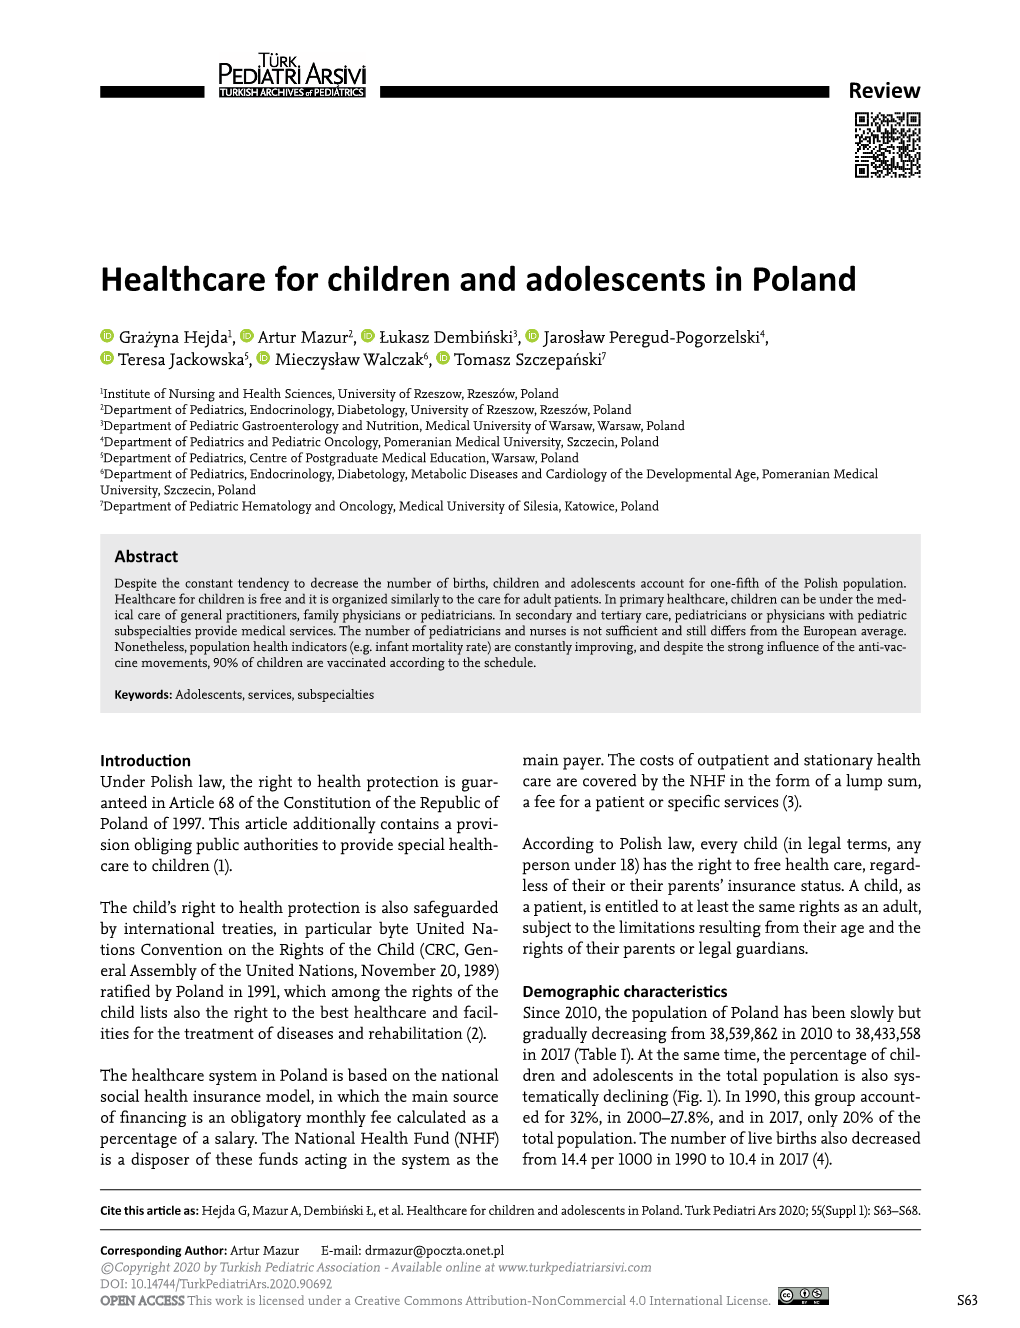 Healthcare for Children and Adolescents in Poland